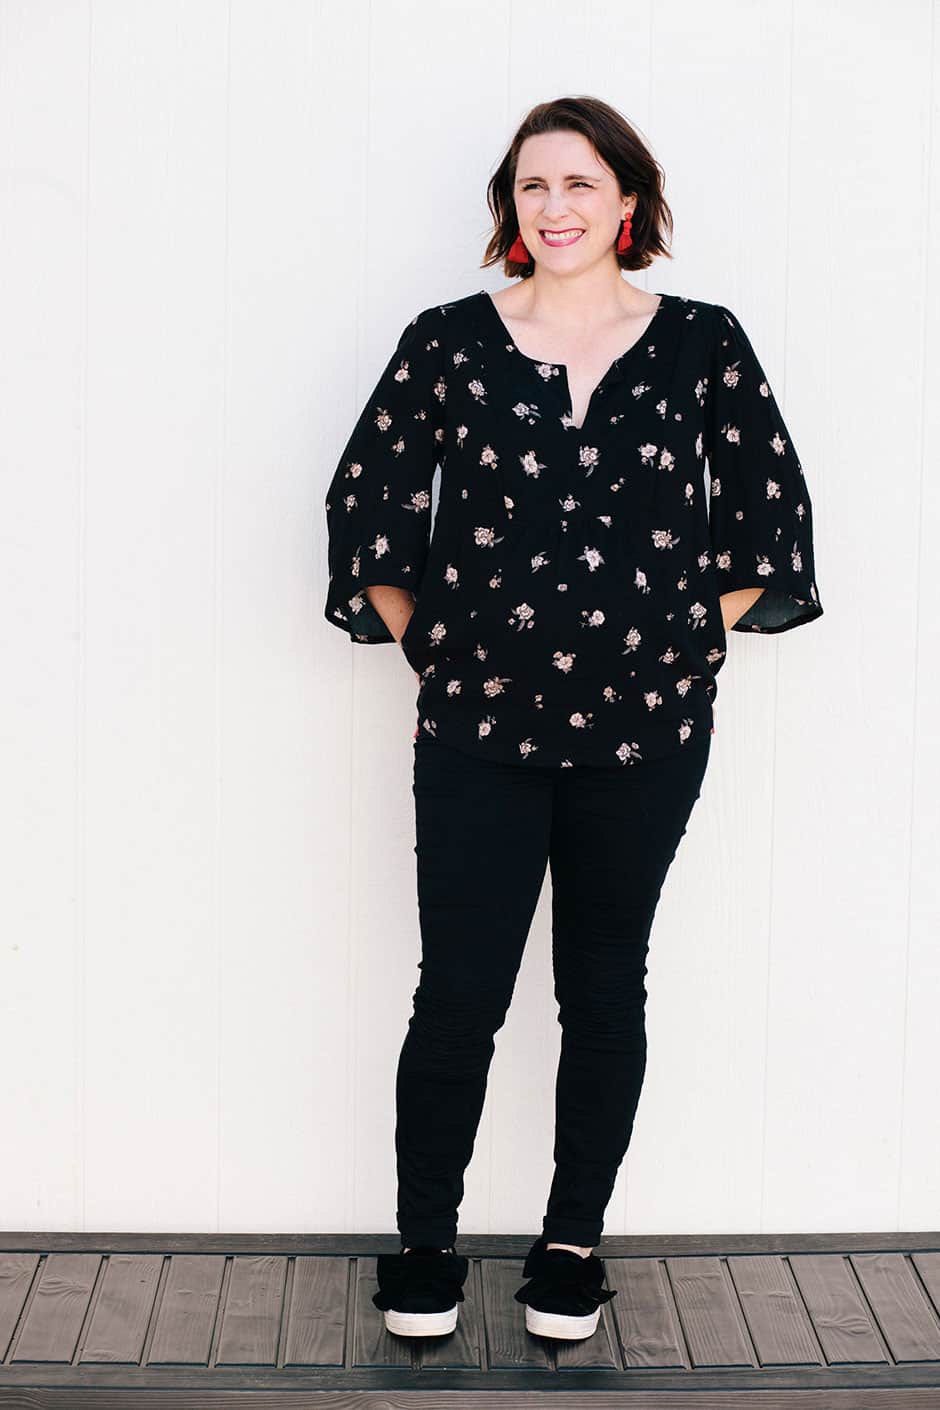 Looking for a home run sewing pattern for pregnancy and postpartum? Check out my version of the Phoenix blouse and how it's working through the third trimester and beyond! Make this DIY flowy top for your pregnancy or anytime you need a comfy, flattering blouse.